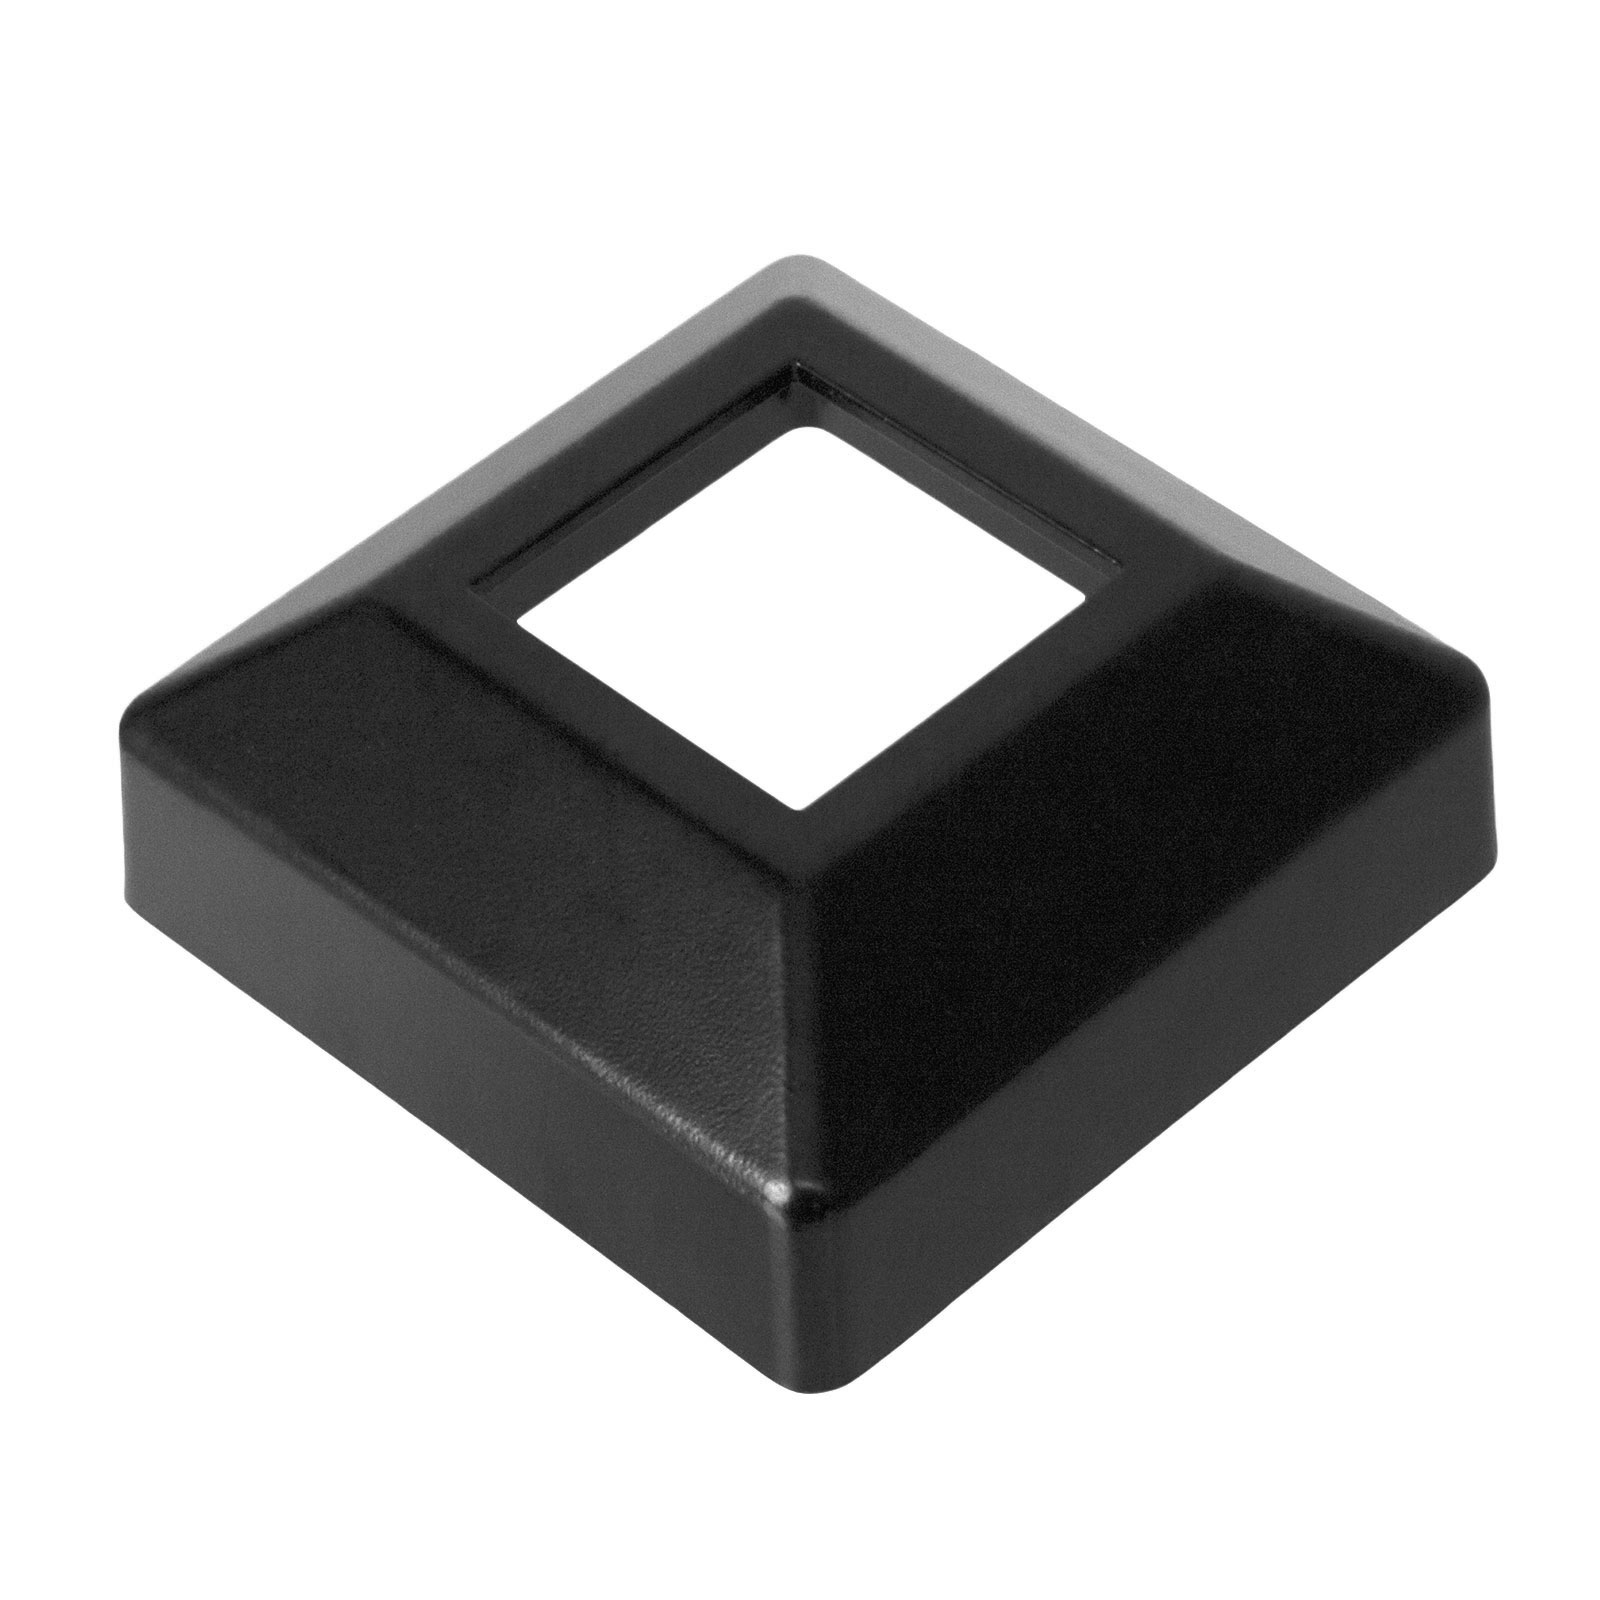 Single Piece Cover Plate for 2 1/2 Inch Square Floor Flange